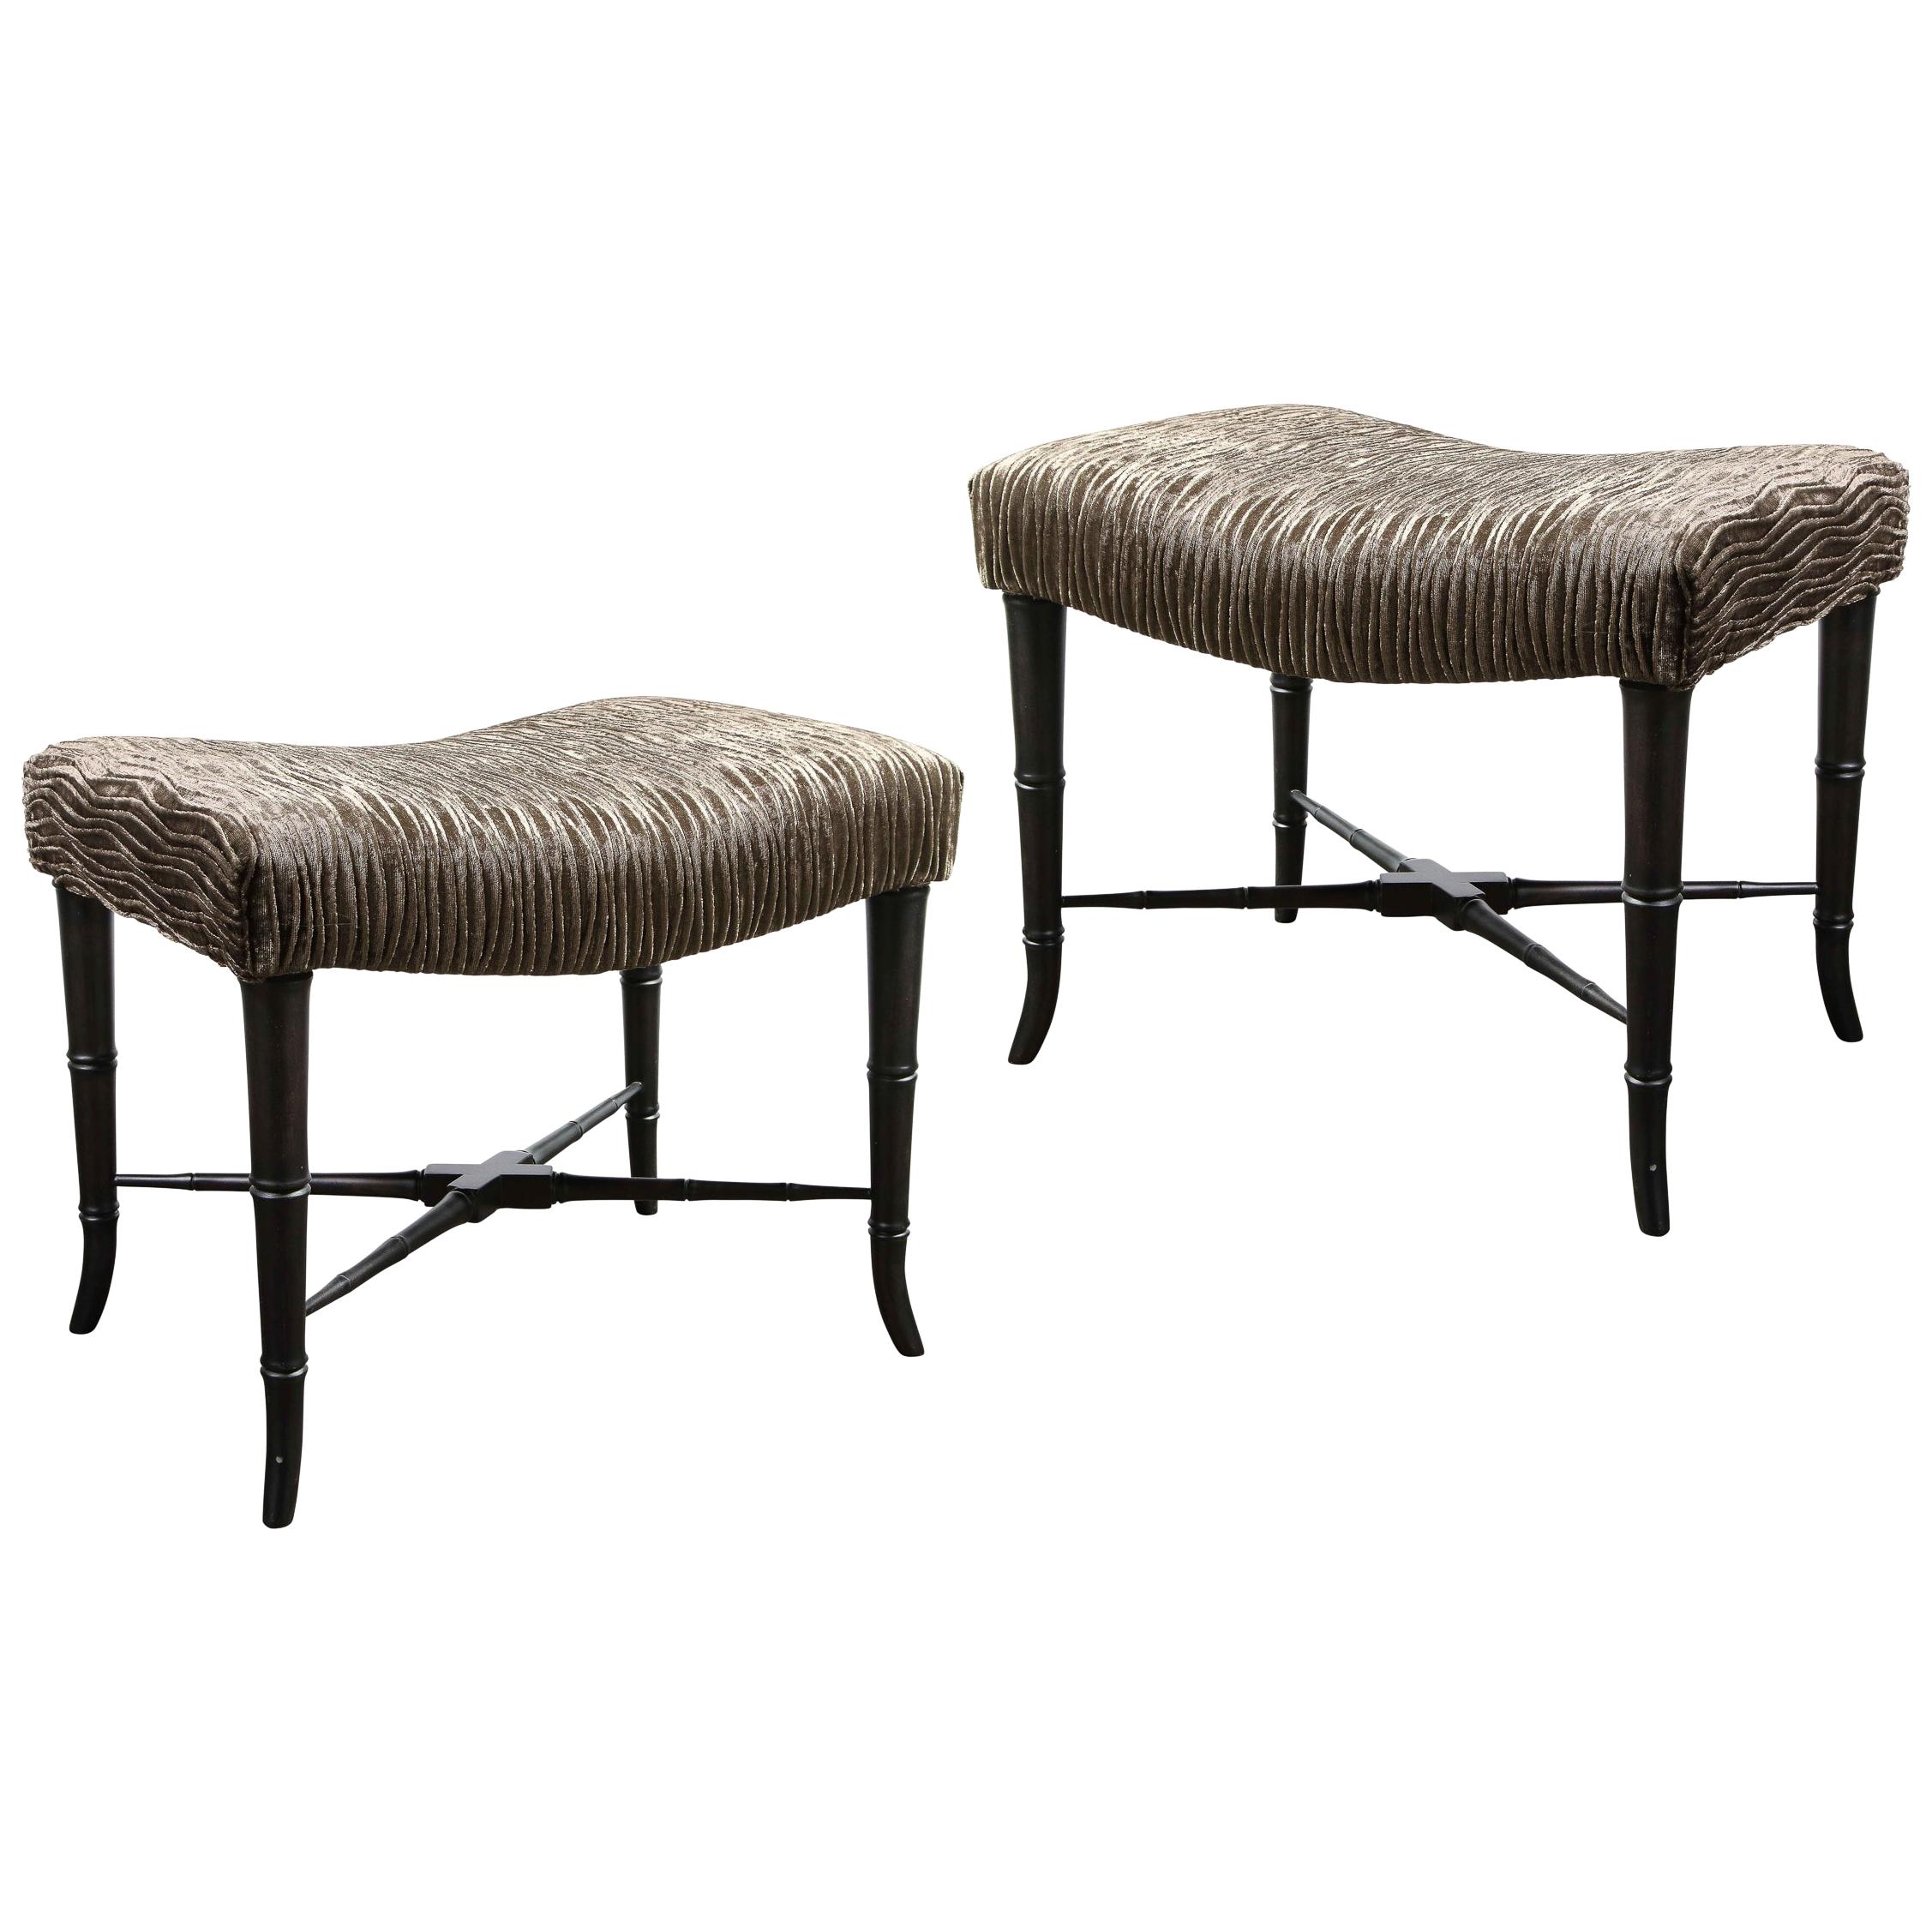 Pair of Mid-Century Modern X-Form Stools in Gauffraged Smoked Bronze Velvet For Sale